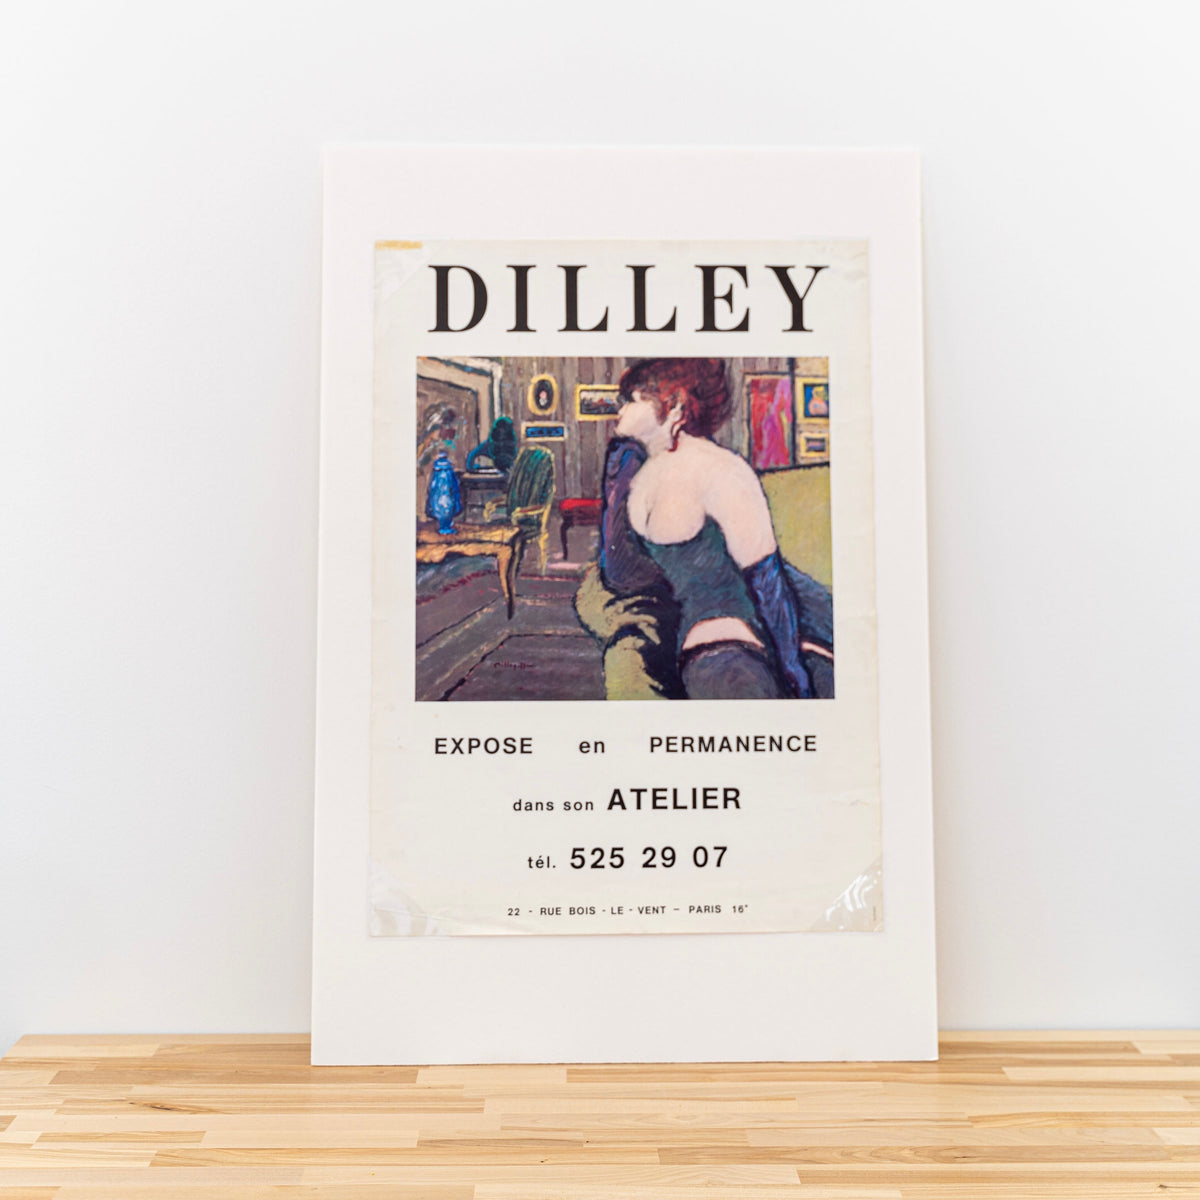 Vintage Dilley Dans Son Atelier French Art Gallery Exhibition Poster